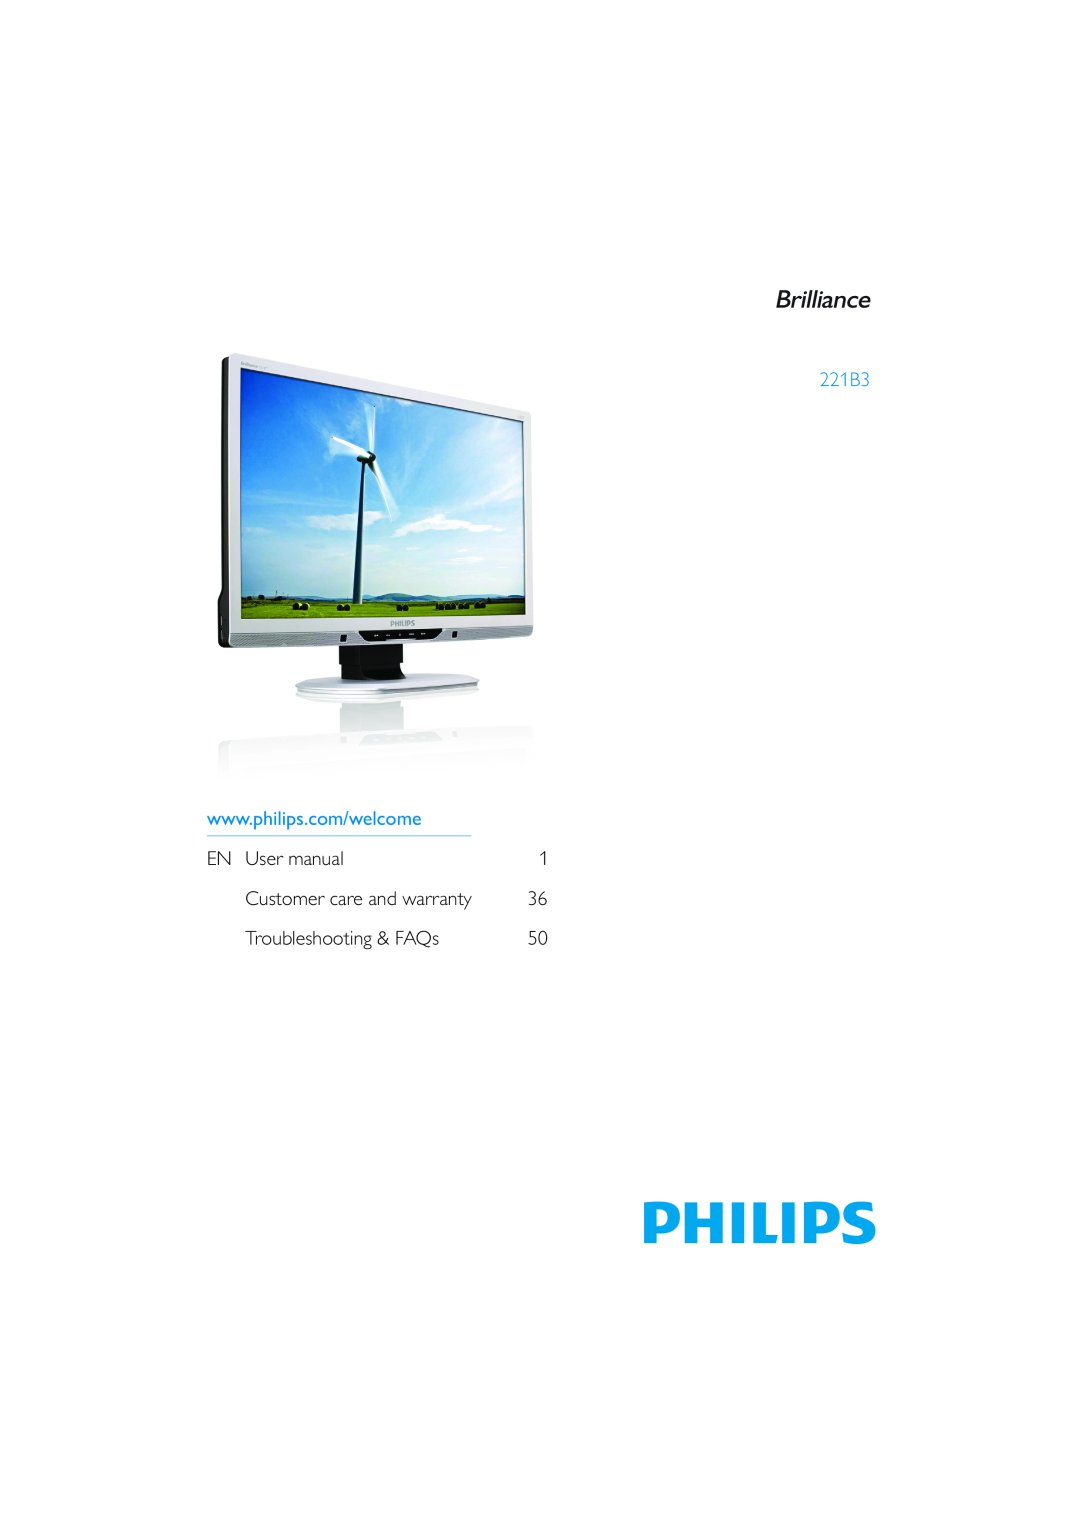 Philips 221B3 user manual EN User manual, Customer care and warranty, Troubleshooting & FAQs 